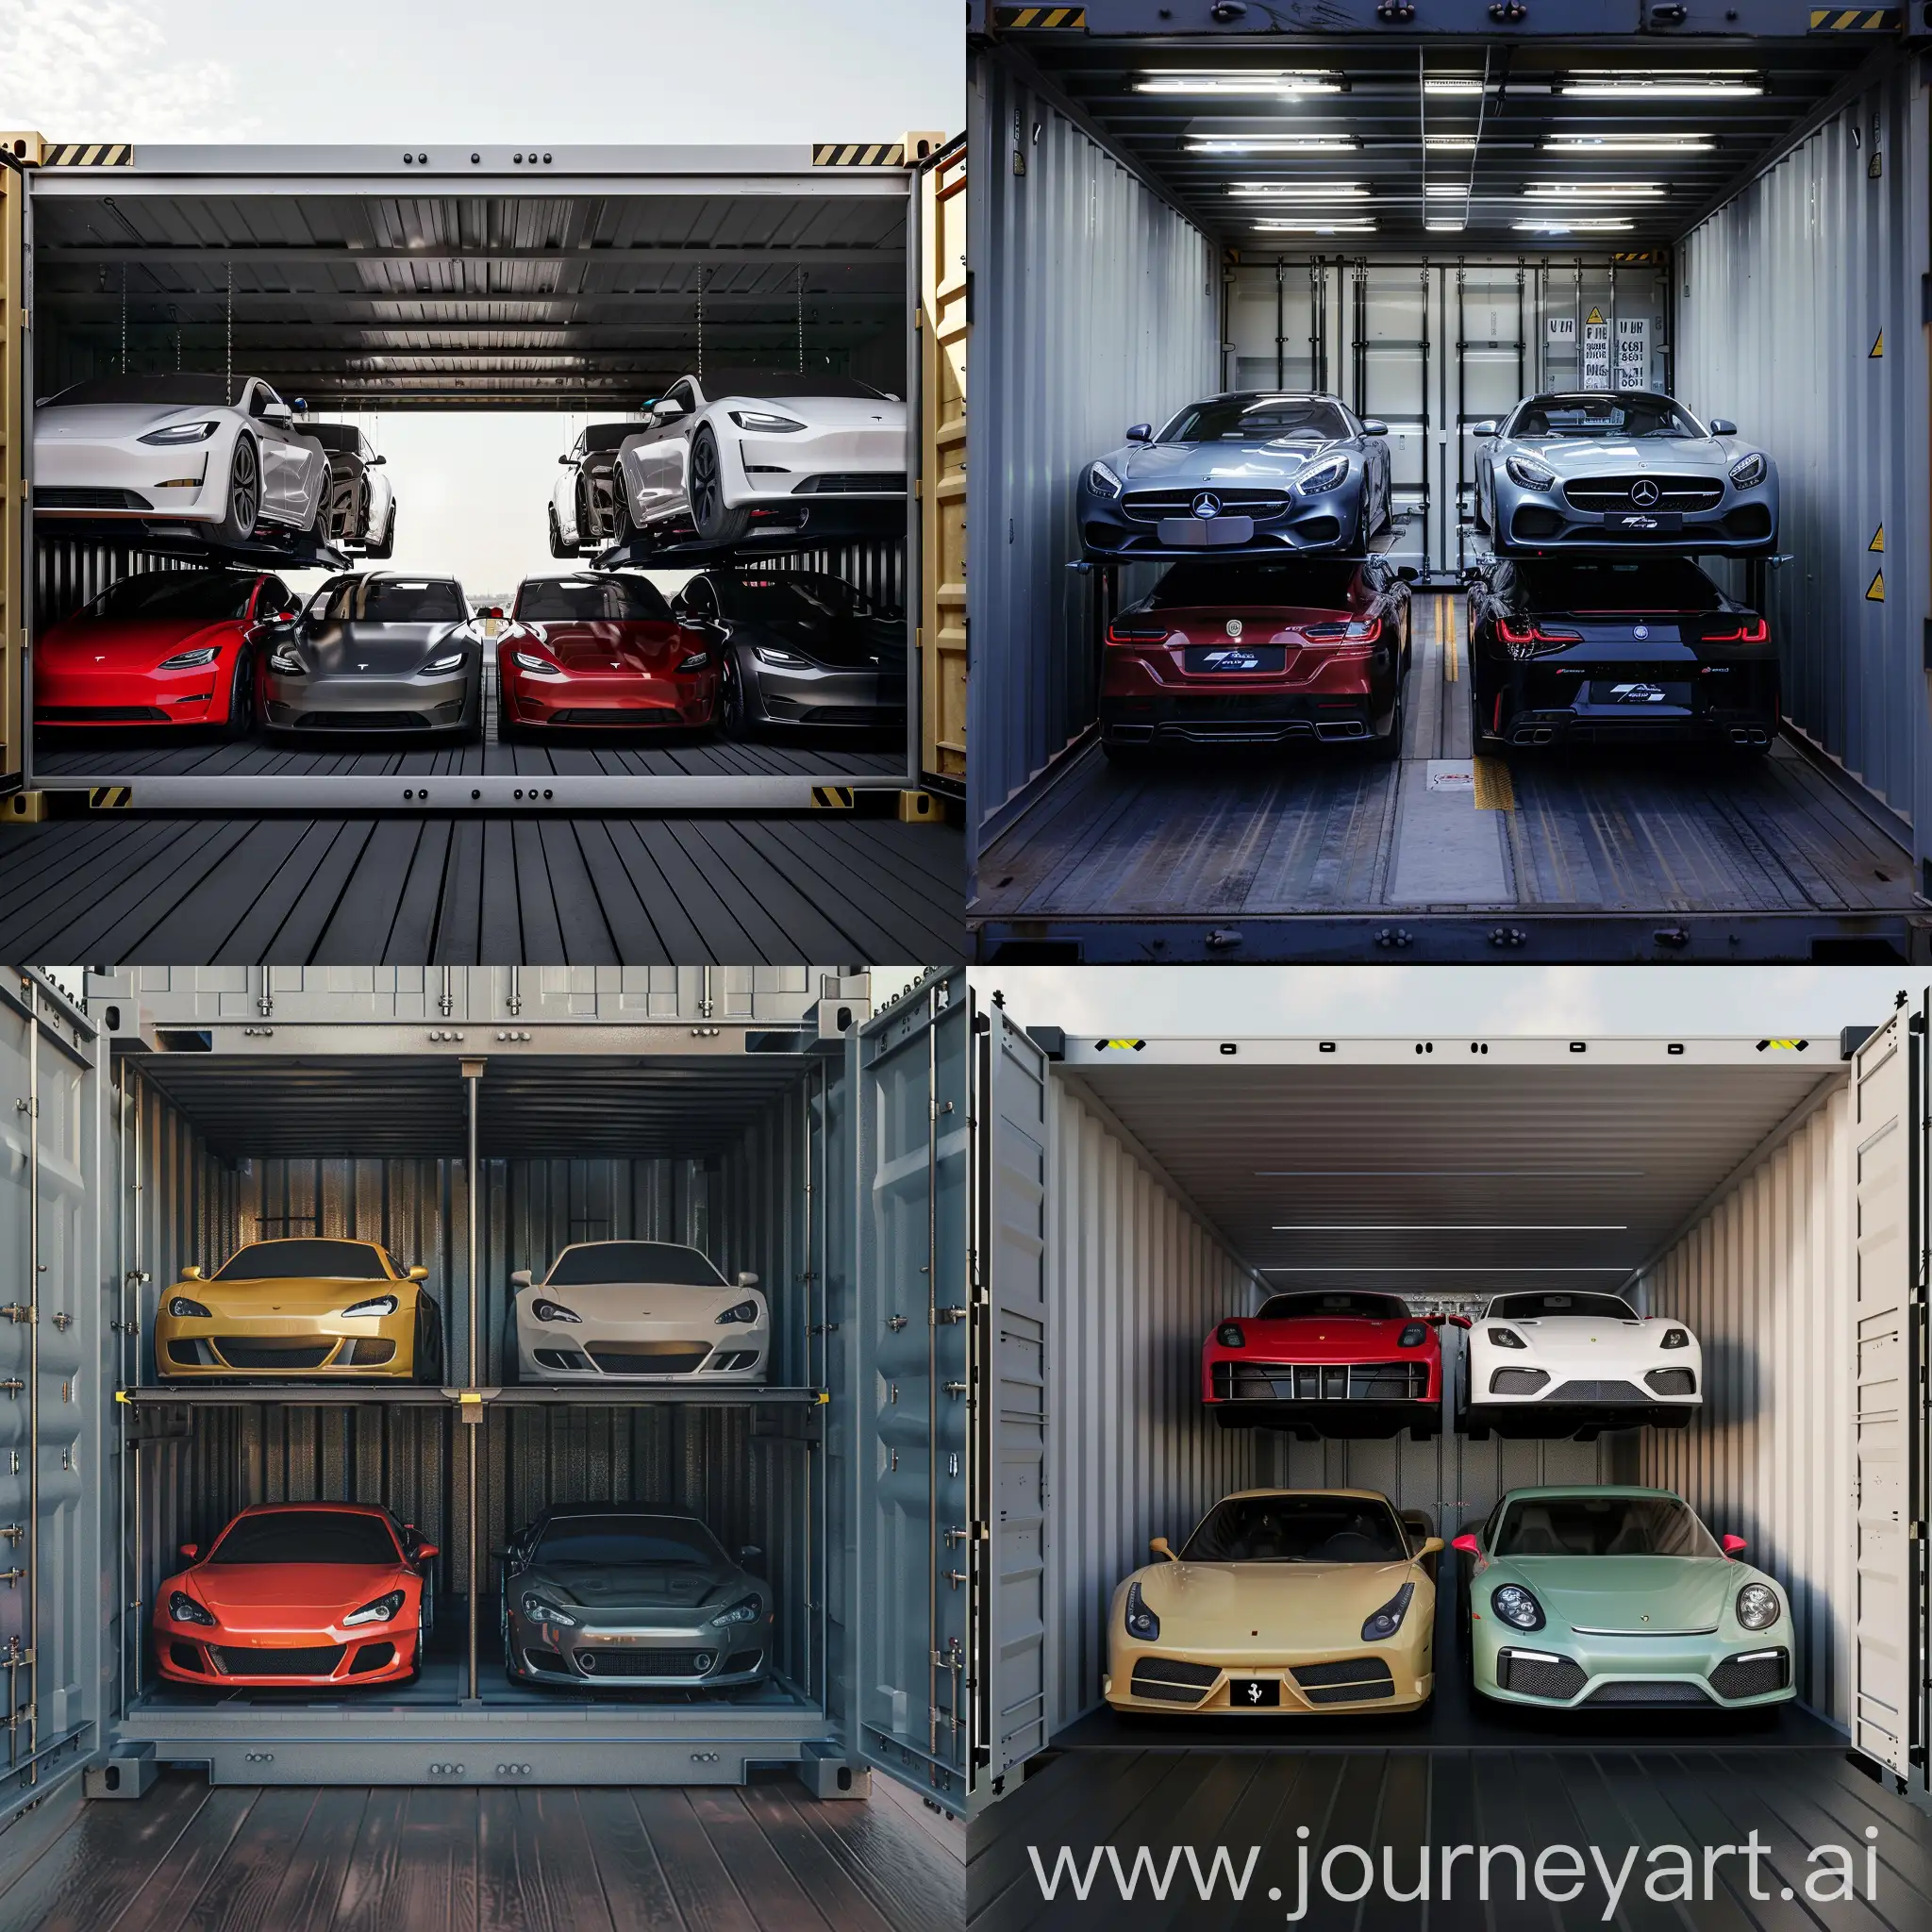 Four-Cars-Loaded-in-Container-Transportation-Scene